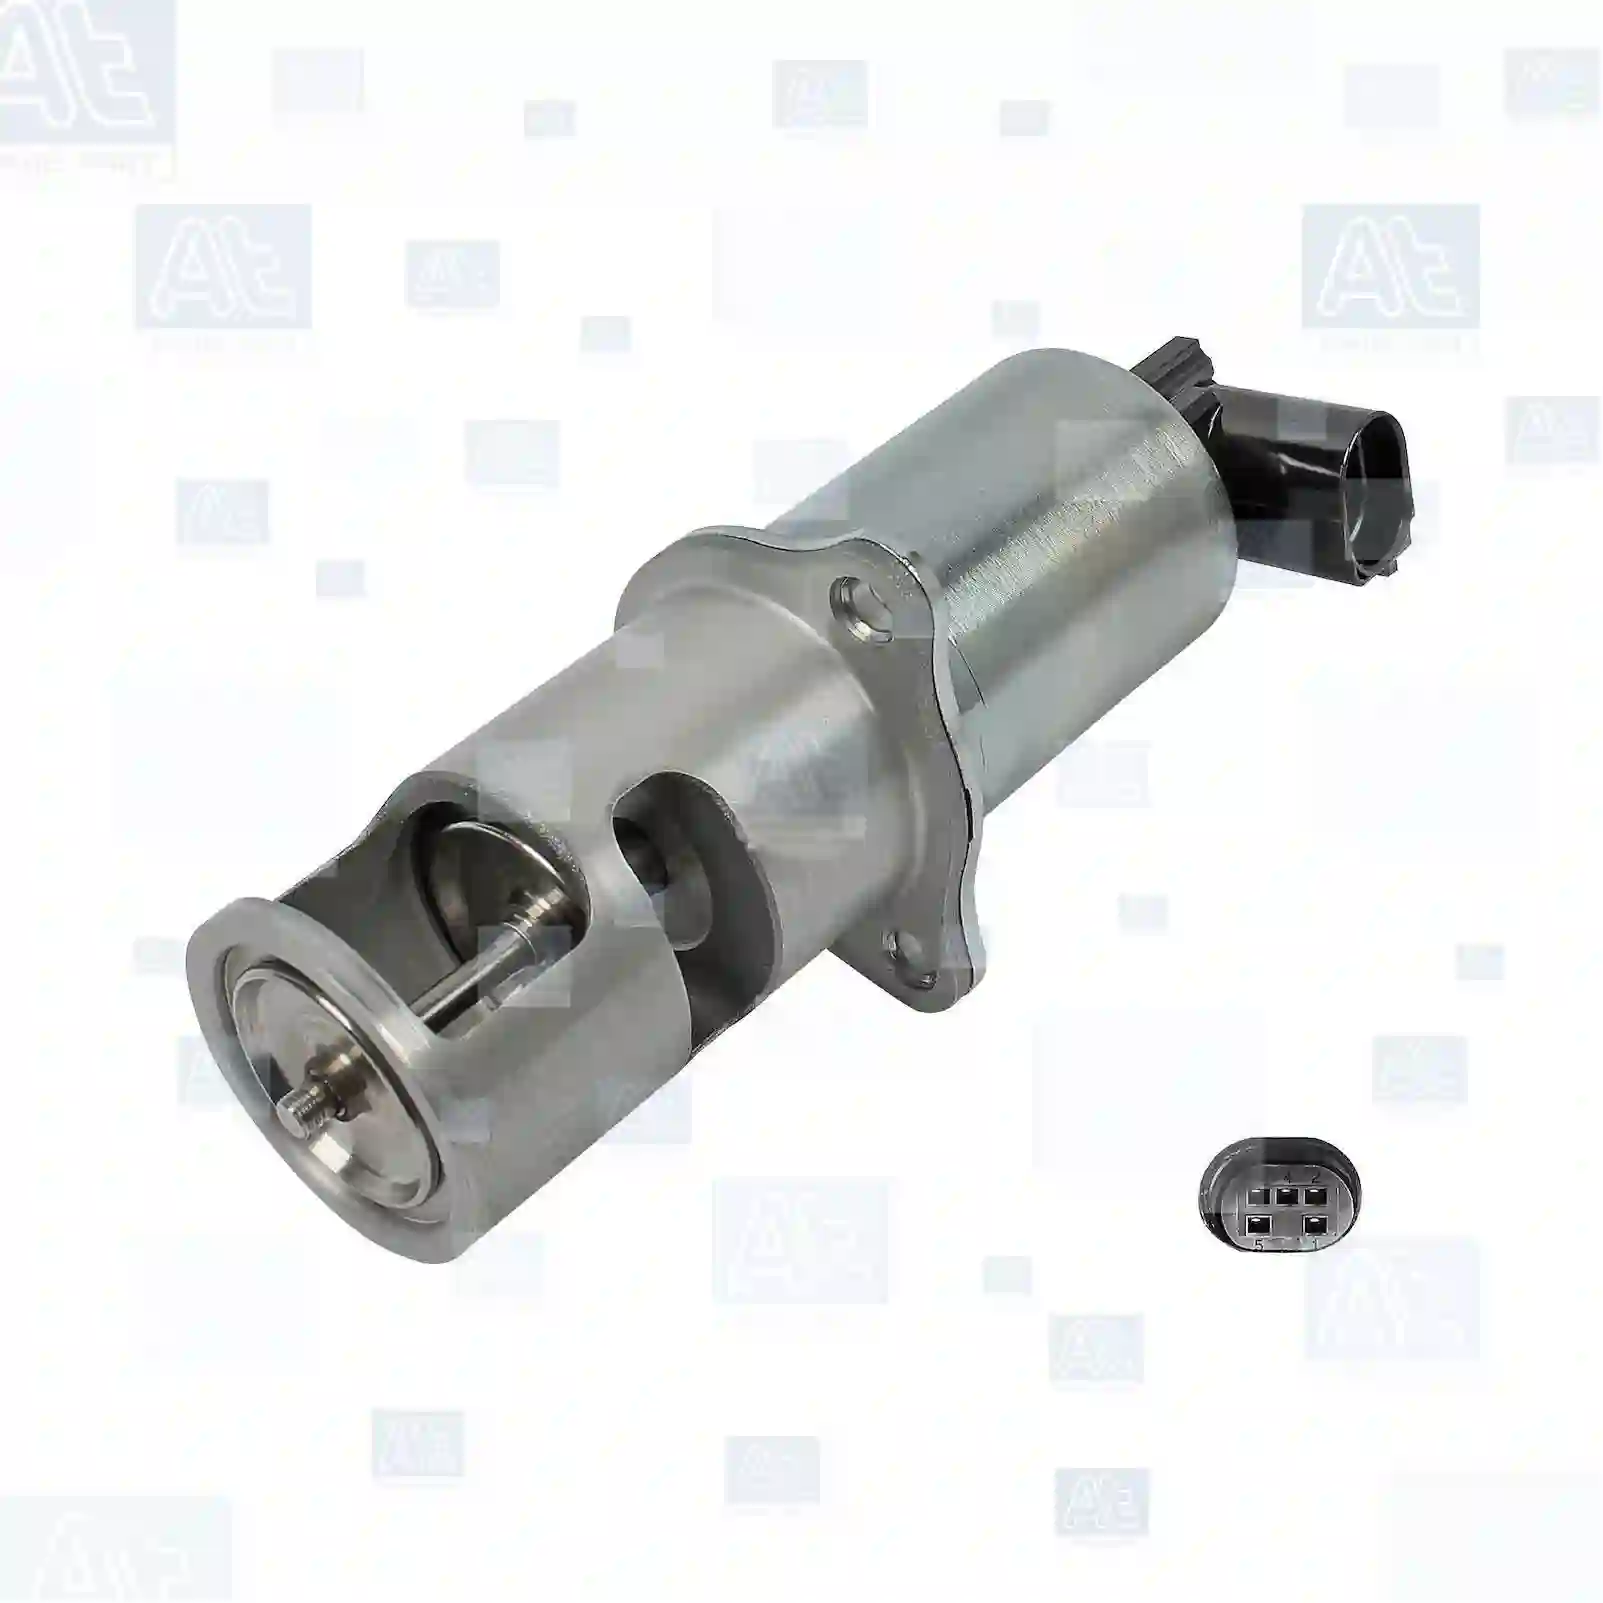 Valve, exhaust gas recirculation, 77701660, 4409585, 4411757, 4412632, 4413408, 4415798, 4416575, 4430902, 93106754, 93160003, 93160228, 93160754, 93161069, 93161219, 93161487, 93183146, 93188701, M616666, MW30638635, MW30662336, MW30662345, MW30670108, MW30774534, MW30777076, 14710-AW300, 14710-AW301, 14710-AW302, 14710-AW303, 14920-00Q0A, 14920-00Q0B, 14920-00QAA, 14920-00QAB, 14920-00QAC, 14920-00QAD, 14920-00QAE, 14920-00QAF, 14920-00QAG, 4409585, 4411757, 4412632, 4413408, 4415798, 4416575, 4430902, 6001545462, 7700107797, 8200149333, 8200229190, 8200231630, 8200254722, 8200282880, 8200360200, 8200467001, 8200542997, 14985, EGR069, ERV051, LEGR005 ||  77701660 At Spare Part | Engine, Accelerator Pedal, Camshaft, Connecting Rod, Crankcase, Crankshaft, Cylinder Head, Engine Suspension Mountings, Exhaust Manifold, Exhaust Gas Recirculation, Filter Kits, Flywheel Housing, General Overhaul Kits, Engine, Intake Manifold, Oil Cleaner, Oil Cooler, Oil Filter, Oil Pump, Oil Sump, Piston & Liner, Sensor & Switch, Timing Case, Turbocharger, Cooling System, Belt Tensioner, Coolant Filter, Coolant Pipe, Corrosion Prevention Agent, Drive, Expansion Tank, Fan, Intercooler, Monitors & Gauges, Radiator, Thermostat, V-Belt / Timing belt, Water Pump, Fuel System, Electronical Injector Unit, Feed Pump, Fuel Filter, cpl., Fuel Gauge Sender,  Fuel Line, Fuel Pump, Fuel Tank, Injection Line Kit, Injection Pump, Exhaust System, Clutch & Pedal, Gearbox, Propeller Shaft, Axles, Brake System, Hubs & Wheels, Suspension, Leaf Spring, Universal Parts / Accessories, Steering, Electrical System, Cabin Valve, exhaust gas recirculation, 77701660, 4409585, 4411757, 4412632, 4413408, 4415798, 4416575, 4430902, 93106754, 93160003, 93160228, 93160754, 93161069, 93161219, 93161487, 93183146, 93188701, M616666, MW30638635, MW30662336, MW30662345, MW30670108, MW30774534, MW30777076, 14710-AW300, 14710-AW301, 14710-AW302, 14710-AW303, 14920-00Q0A, 14920-00Q0B, 14920-00QAA, 14920-00QAB, 14920-00QAC, 14920-00QAD, 14920-00QAE, 14920-00QAF, 14920-00QAG, 4409585, 4411757, 4412632, 4413408, 4415798, 4416575, 4430902, 6001545462, 7700107797, 8200149333, 8200229190, 8200231630, 8200254722, 8200282880, 8200360200, 8200467001, 8200542997, 14985, EGR069, ERV051, LEGR005 ||  77701660 At Spare Part | Engine, Accelerator Pedal, Camshaft, Connecting Rod, Crankcase, Crankshaft, Cylinder Head, Engine Suspension Mountings, Exhaust Manifold, Exhaust Gas Recirculation, Filter Kits, Flywheel Housing, General Overhaul Kits, Engine, Intake Manifold, Oil Cleaner, Oil Cooler, Oil Filter, Oil Pump, Oil Sump, Piston & Liner, Sensor & Switch, Timing Case, Turbocharger, Cooling System, Belt Tensioner, Coolant Filter, Coolant Pipe, Corrosion Prevention Agent, Drive, Expansion Tank, Fan, Intercooler, Monitors & Gauges, Radiator, Thermostat, V-Belt / Timing belt, Water Pump, Fuel System, Electronical Injector Unit, Feed Pump, Fuel Filter, cpl., Fuel Gauge Sender,  Fuel Line, Fuel Pump, Fuel Tank, Injection Line Kit, Injection Pump, Exhaust System, Clutch & Pedal, Gearbox, Propeller Shaft, Axles, Brake System, Hubs & Wheels, Suspension, Leaf Spring, Universal Parts / Accessories, Steering, Electrical System, Cabin